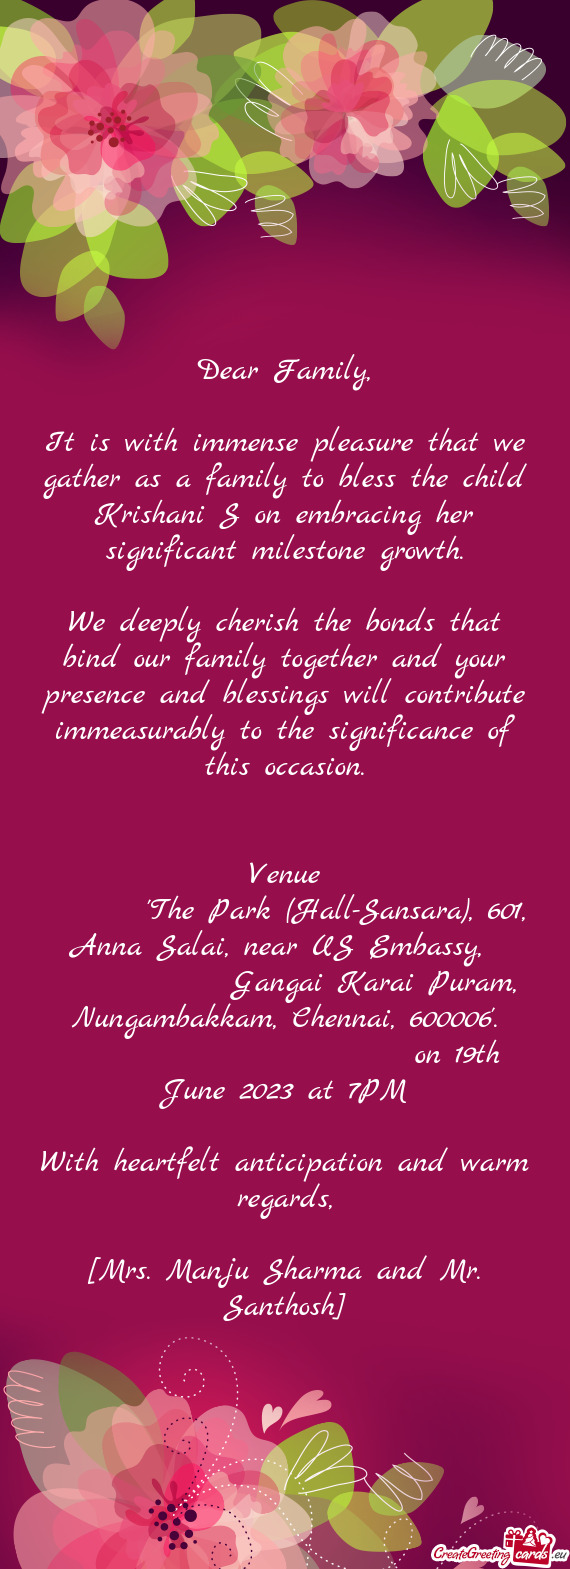 It is with immense pleasure that we gather as a family to bless the child Krishani S on embracing he